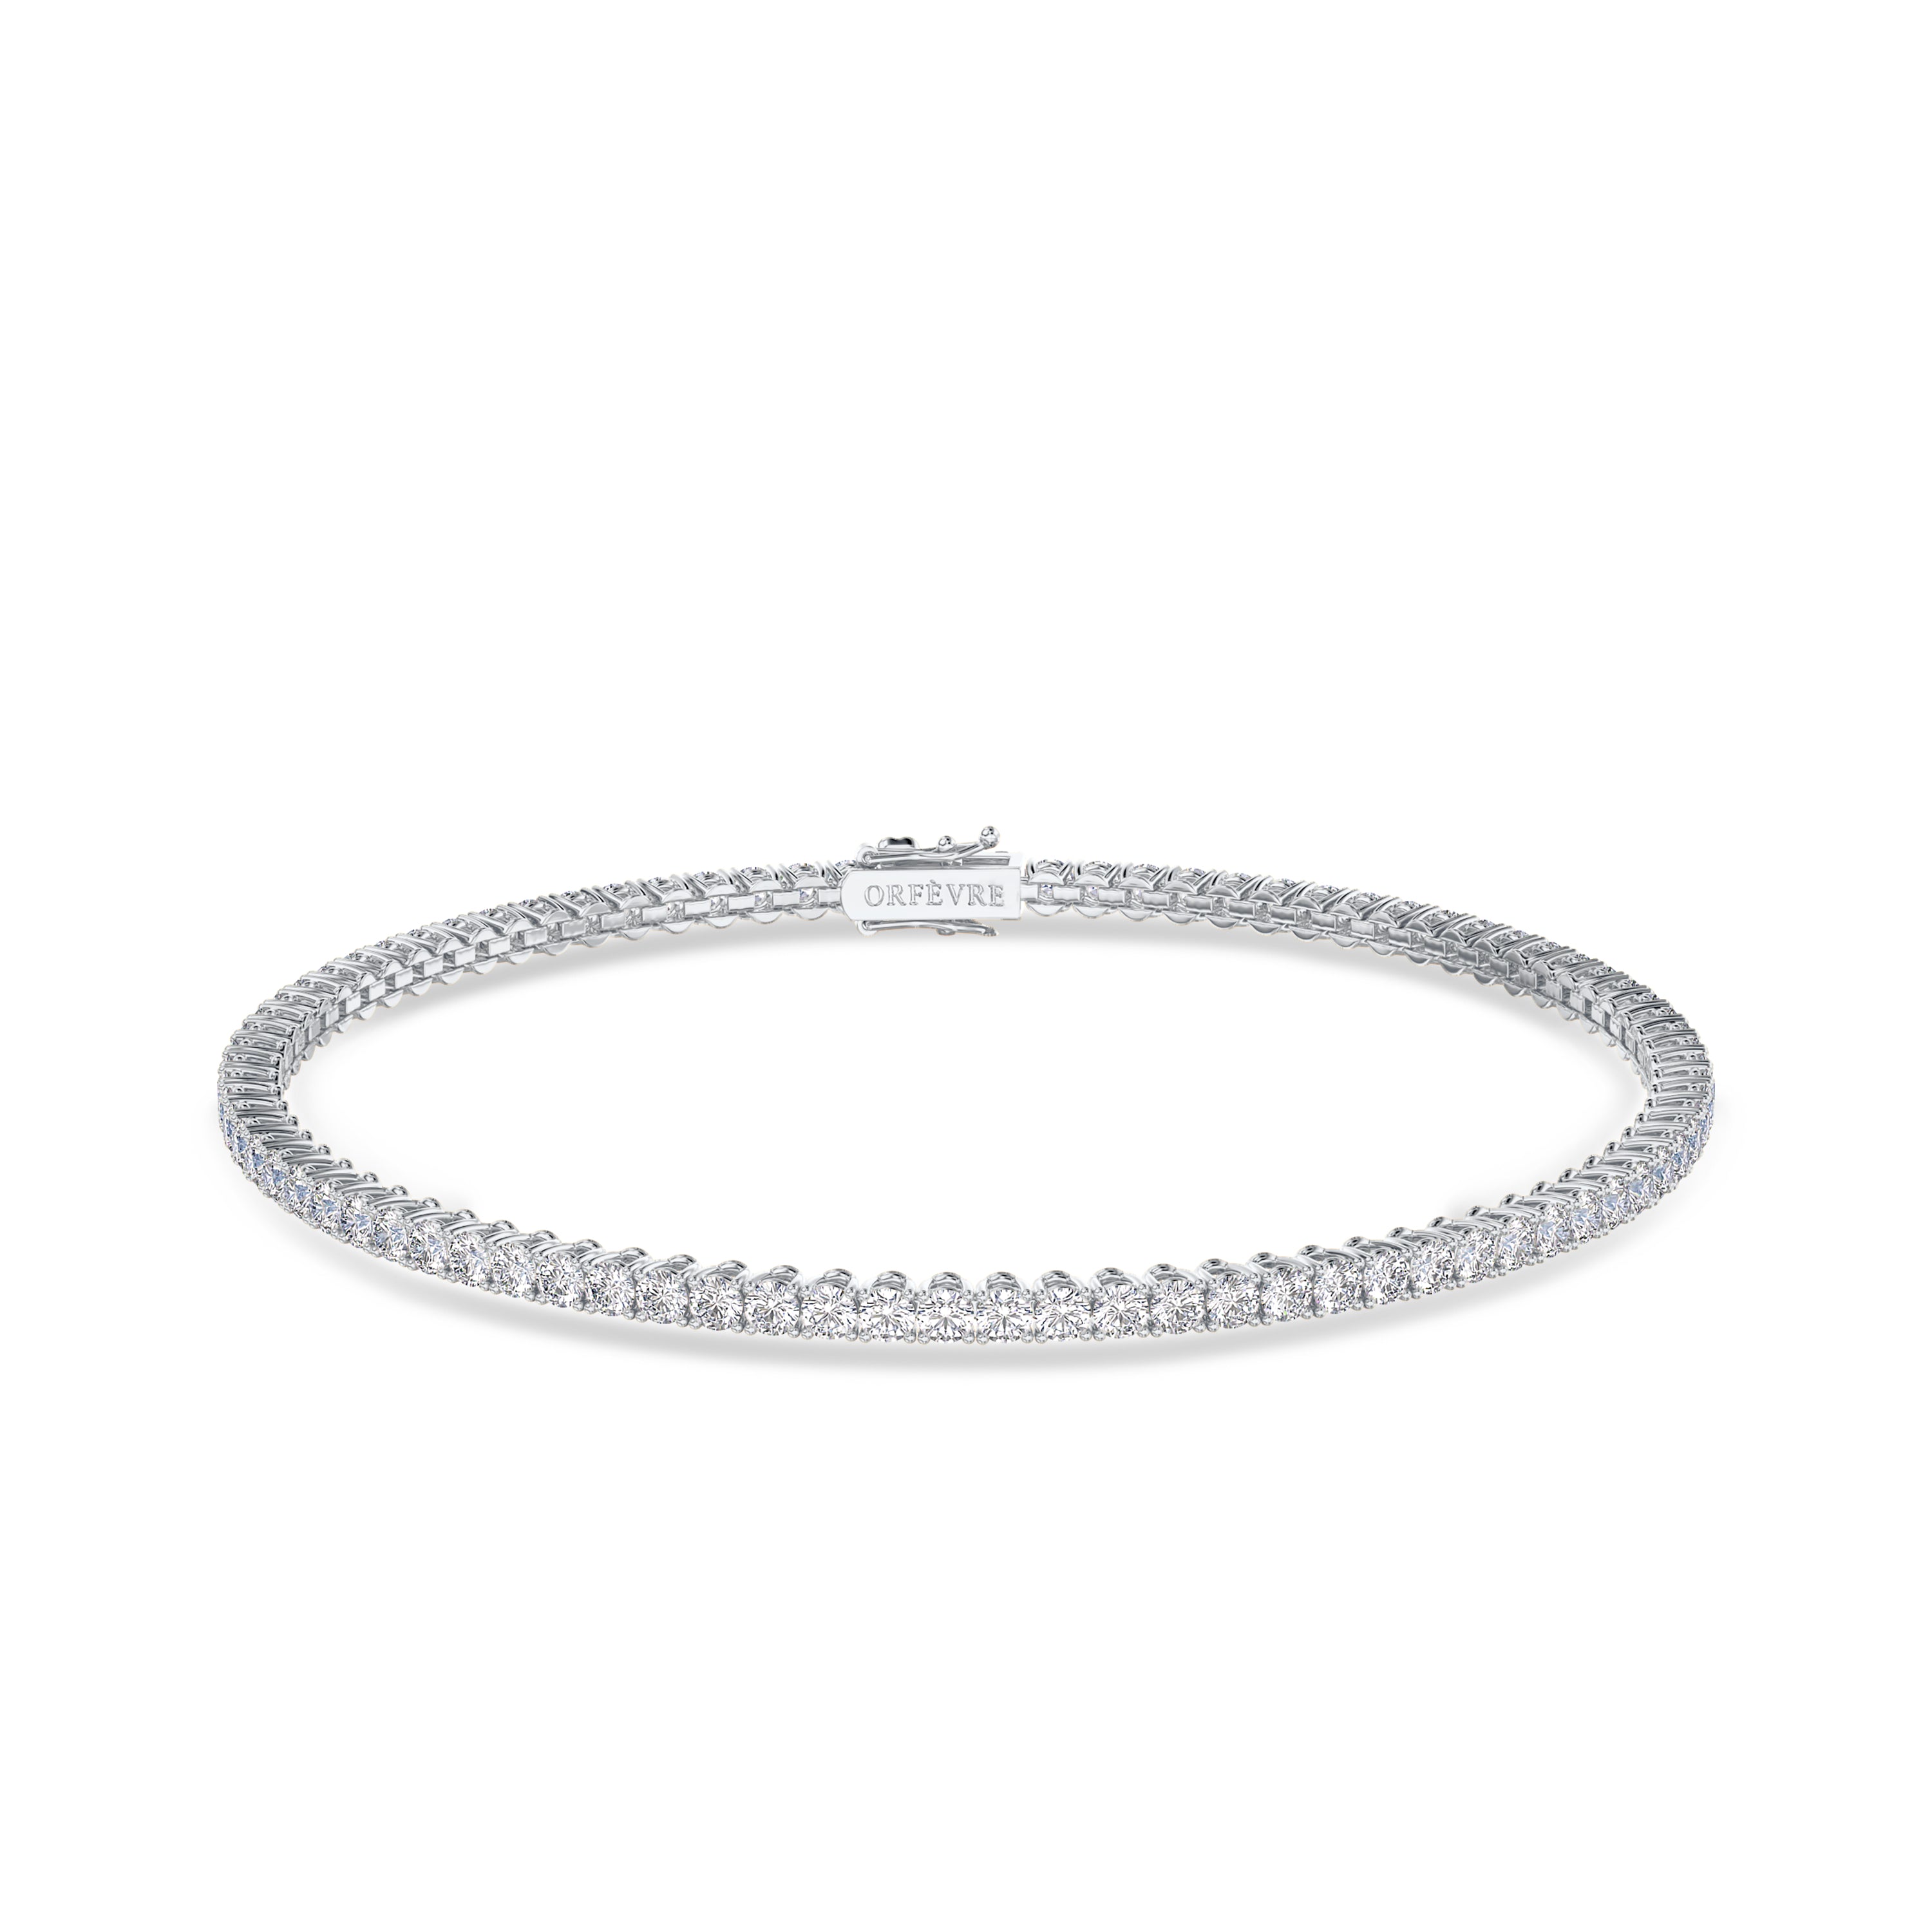 2.80 carat tennis bracelet in 18K white gold, FG color and SI clarity